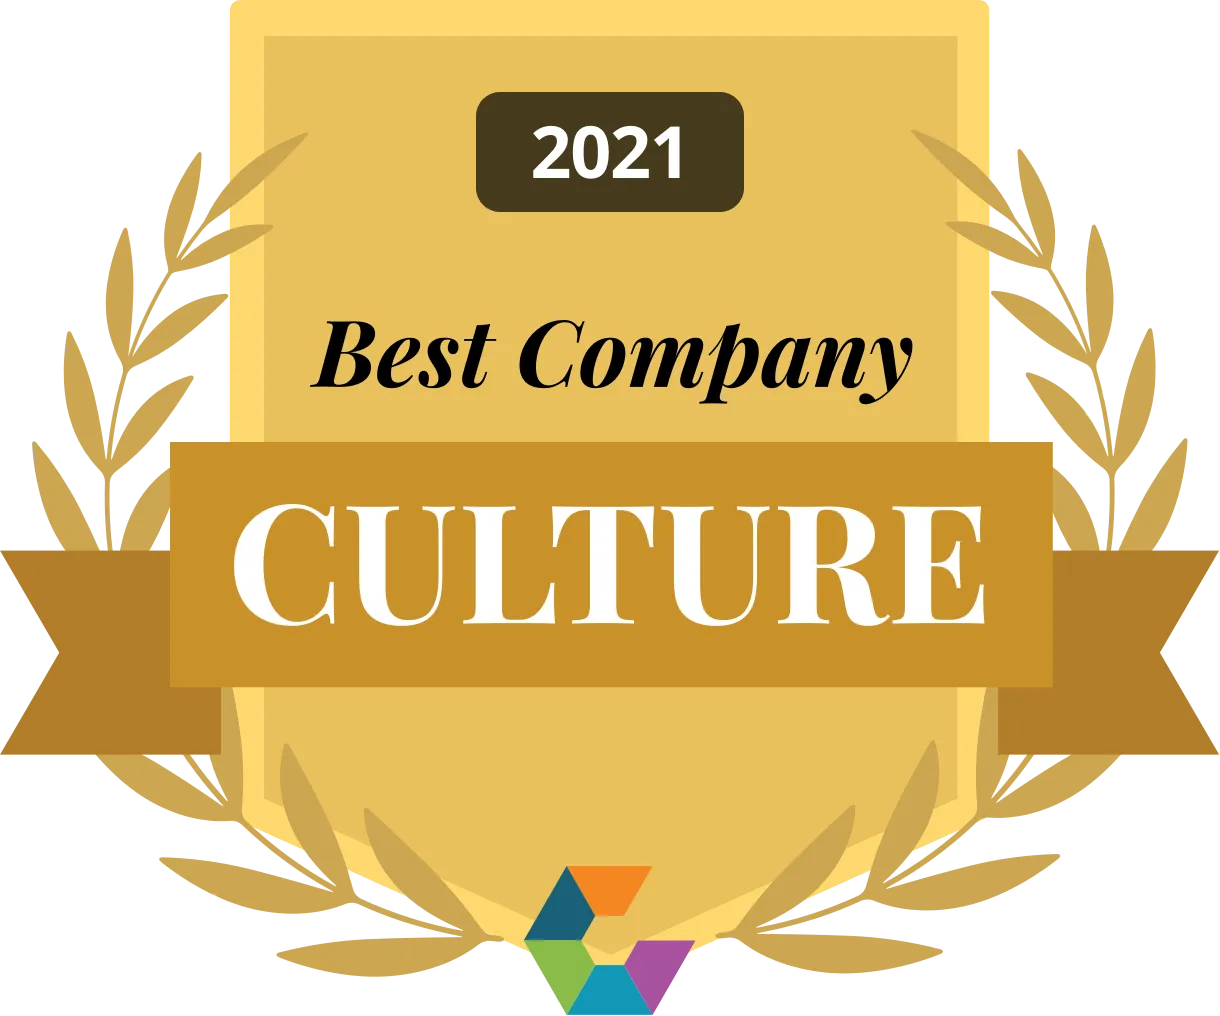 Comparably Best Company Culture 2021